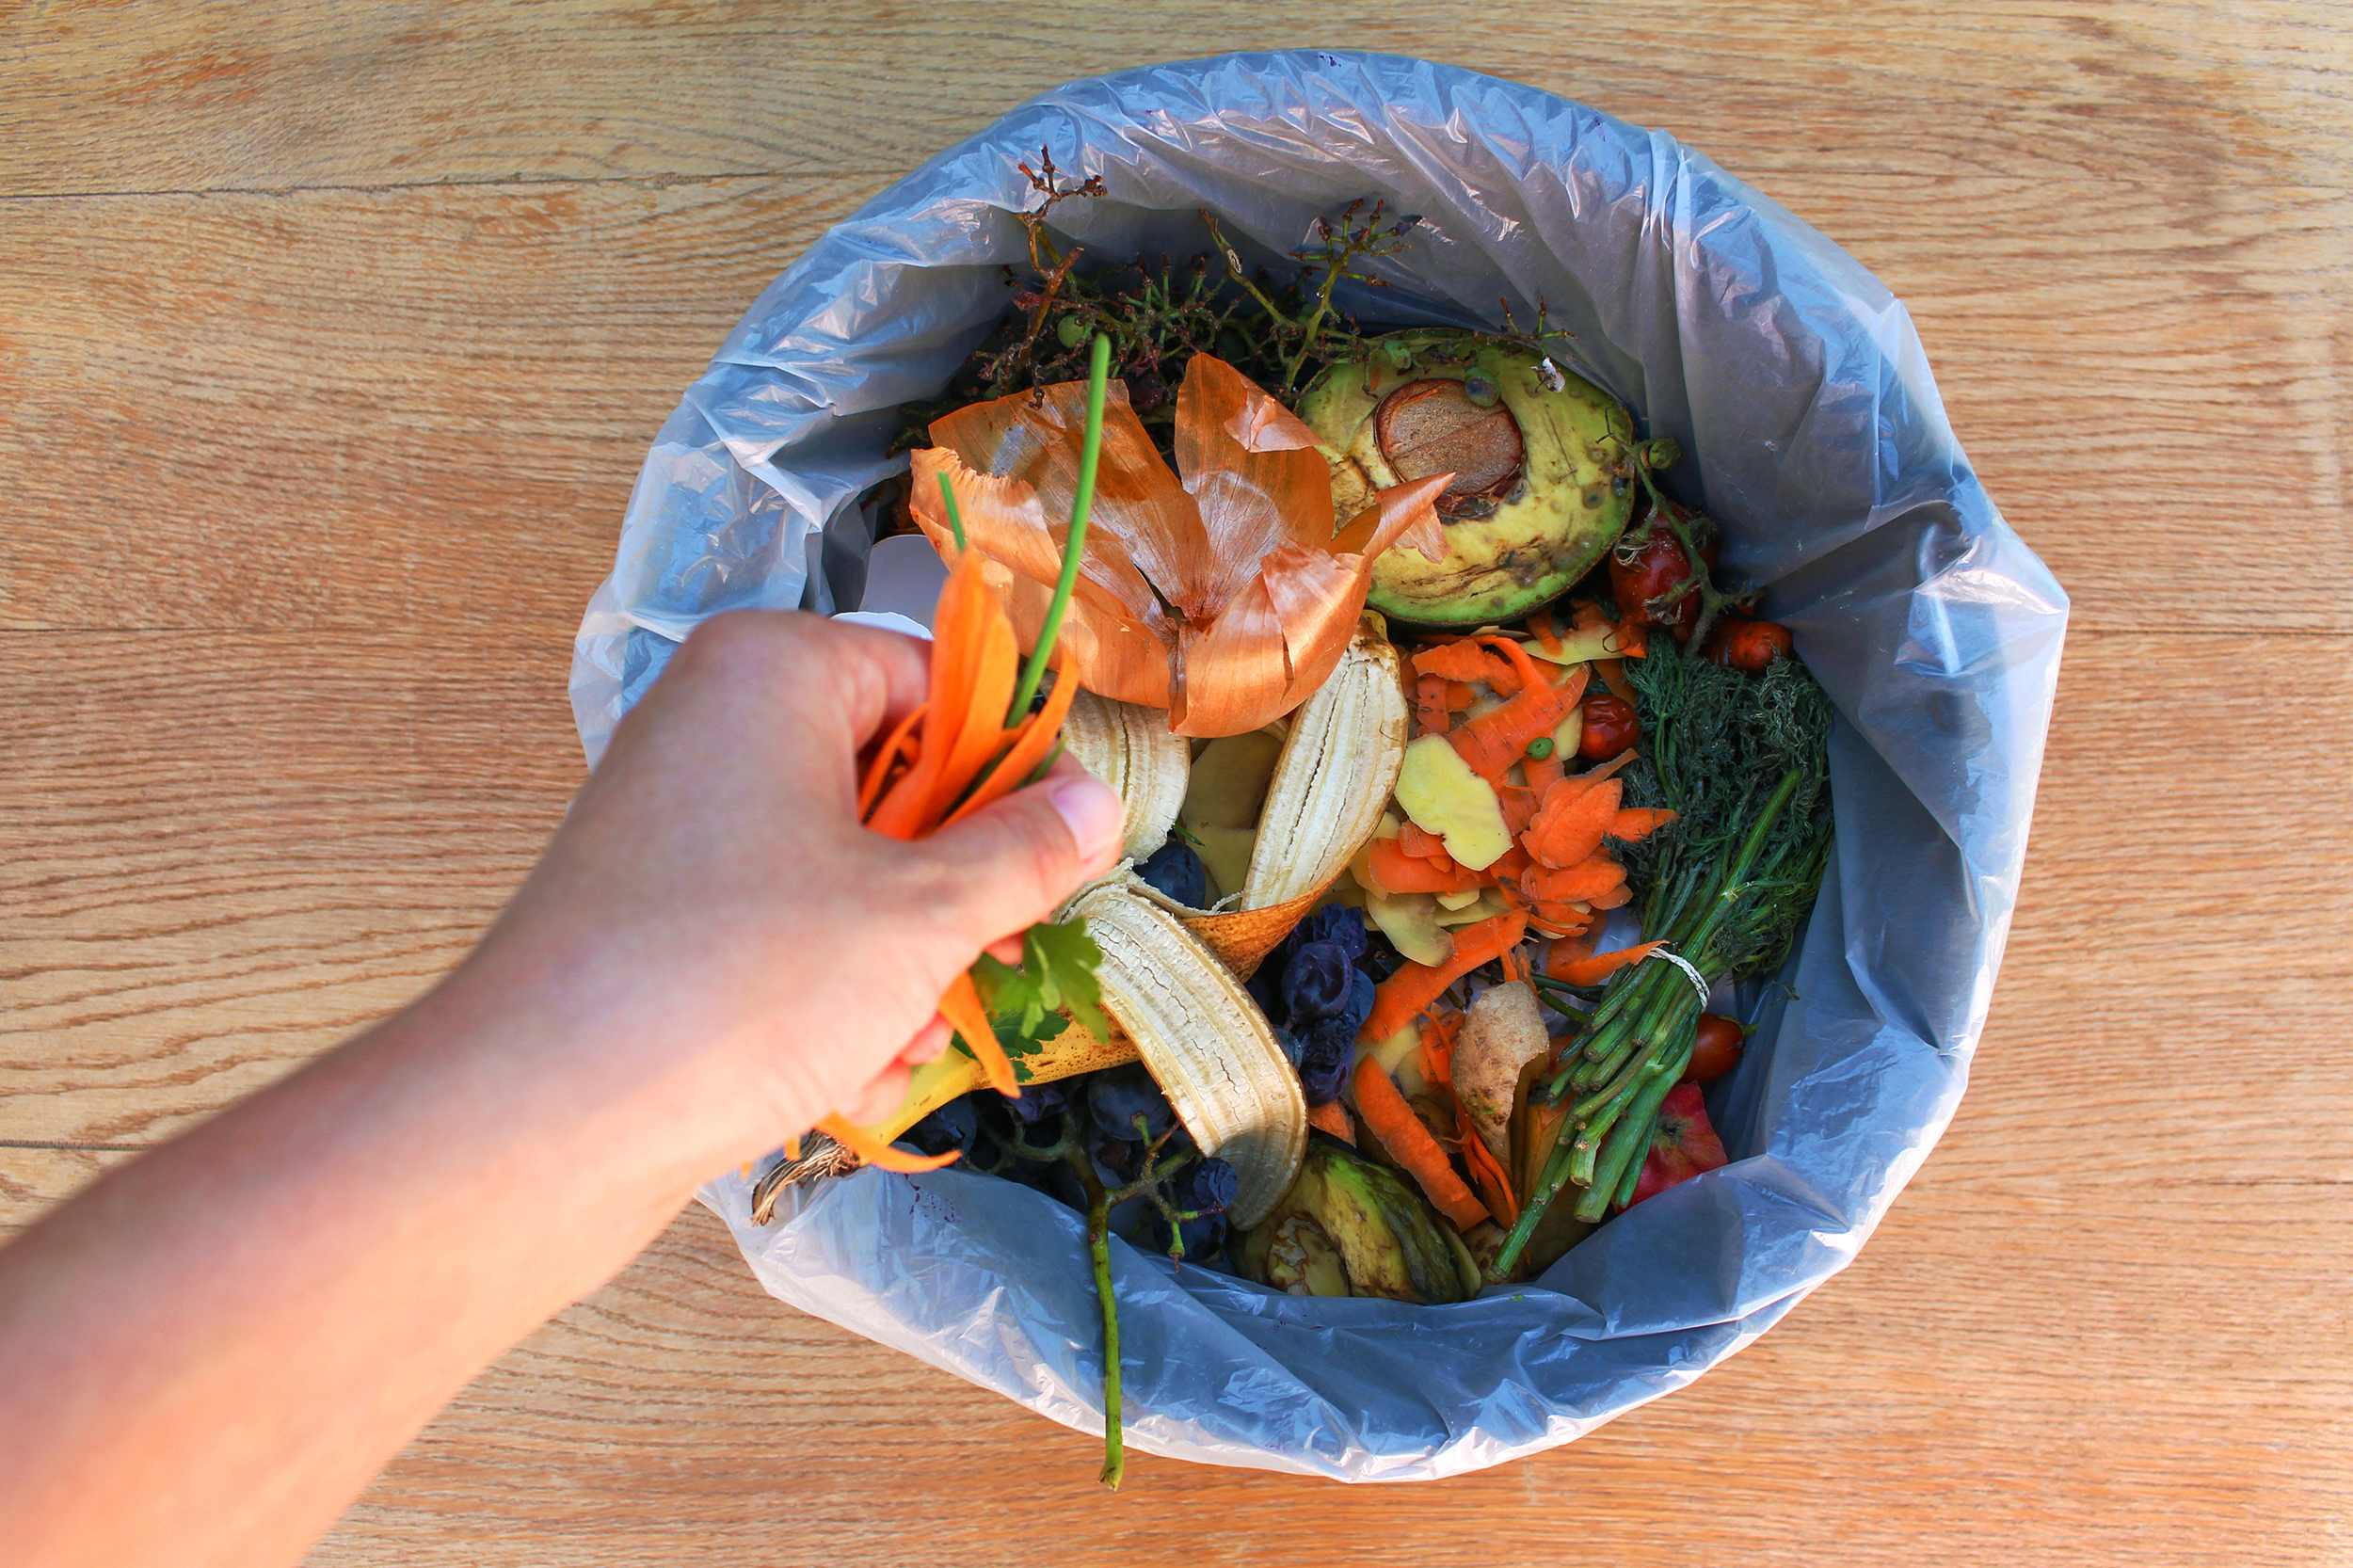 Food waste in a single occupancy household